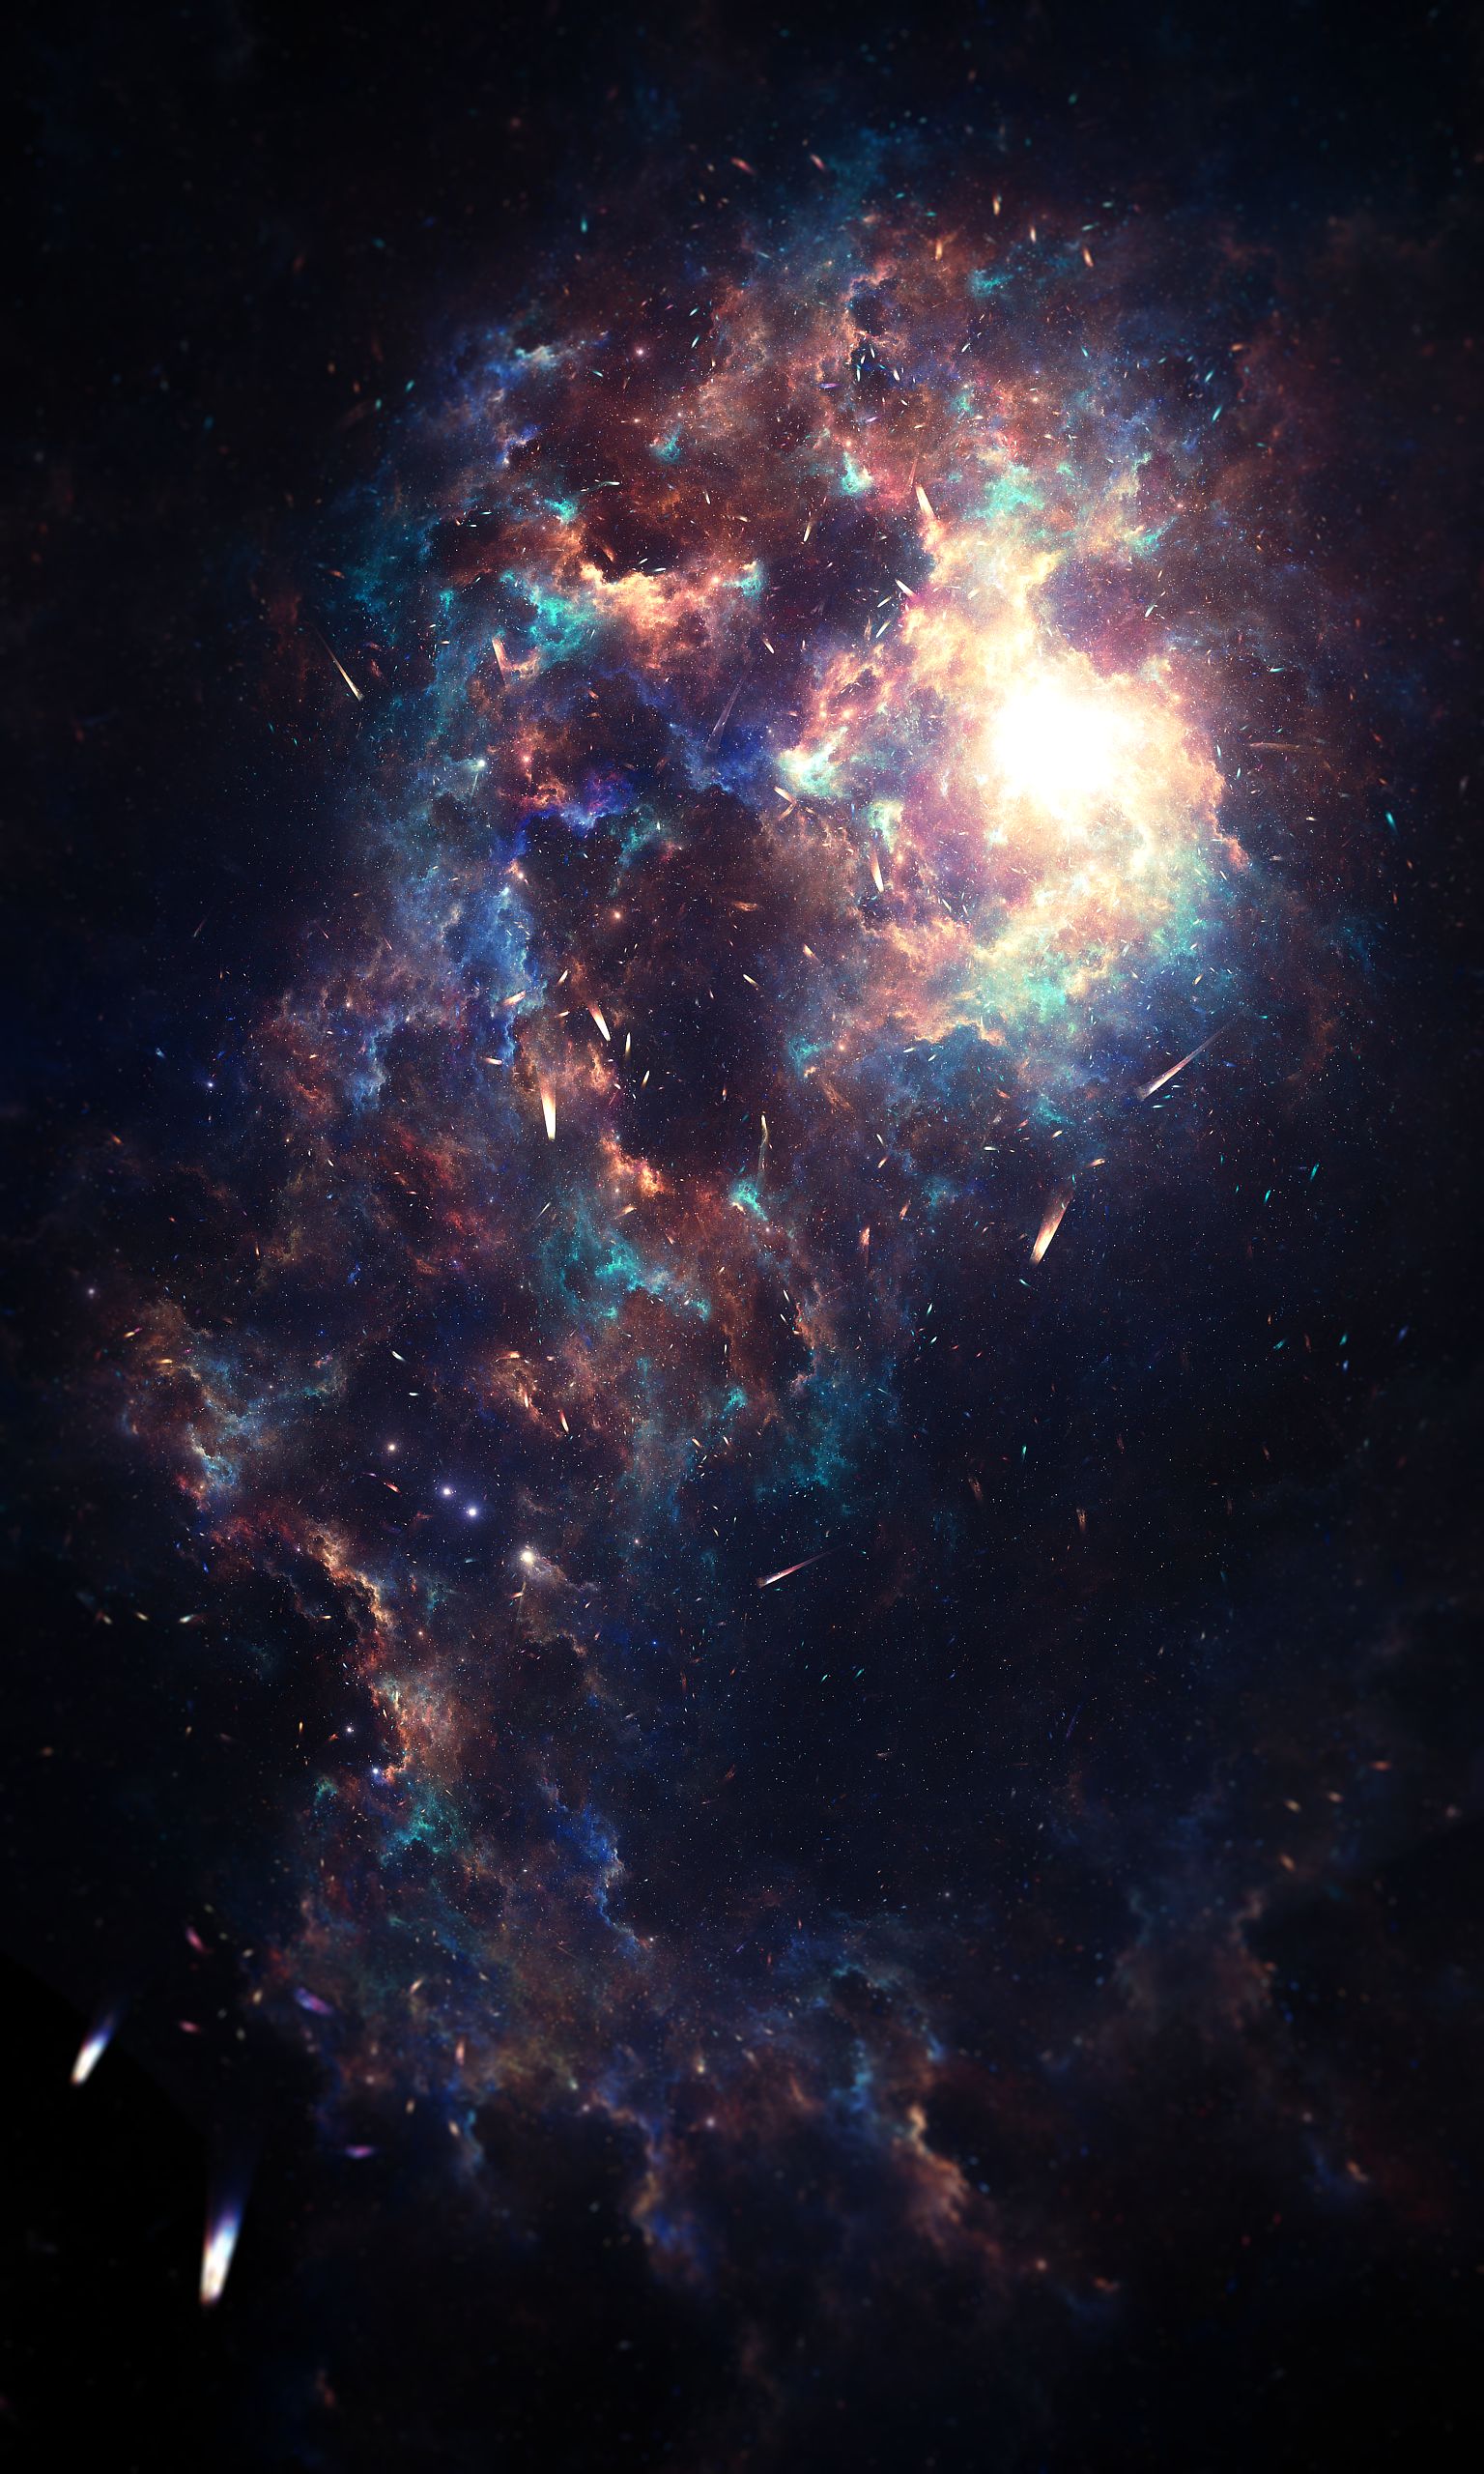 Popular Galaxy Image for Phone